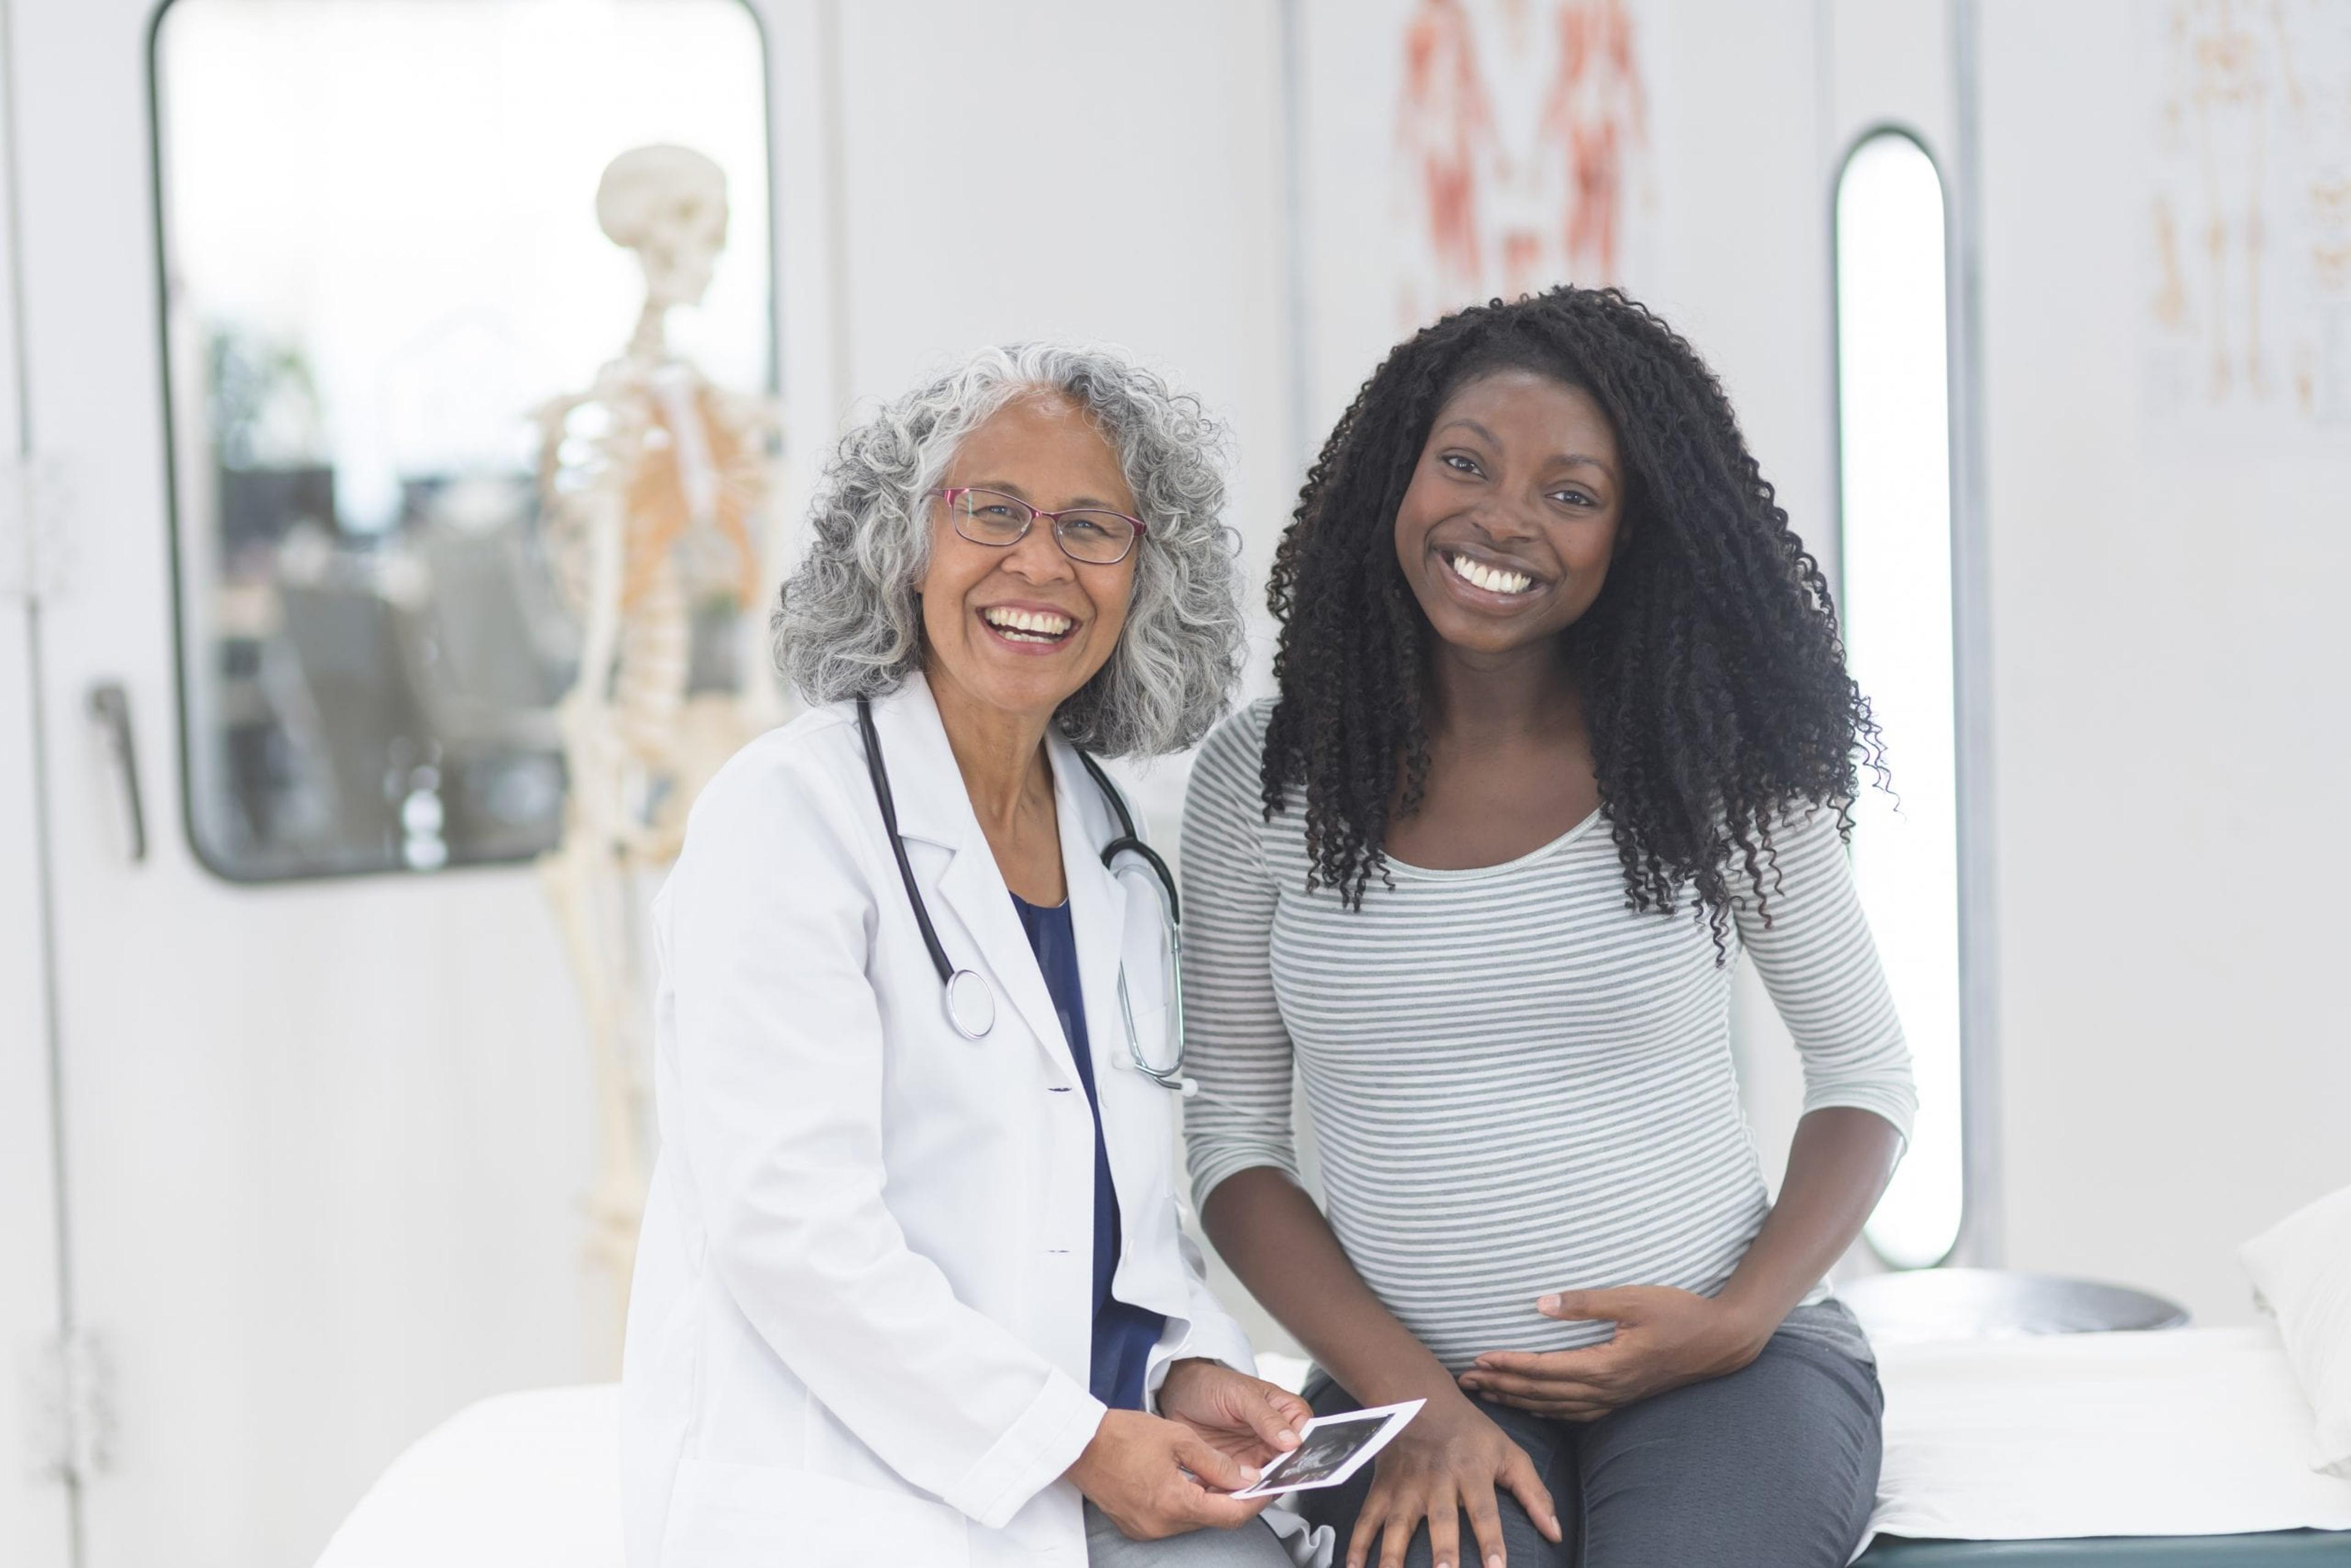 Pregnant woman smiling with her doctor.